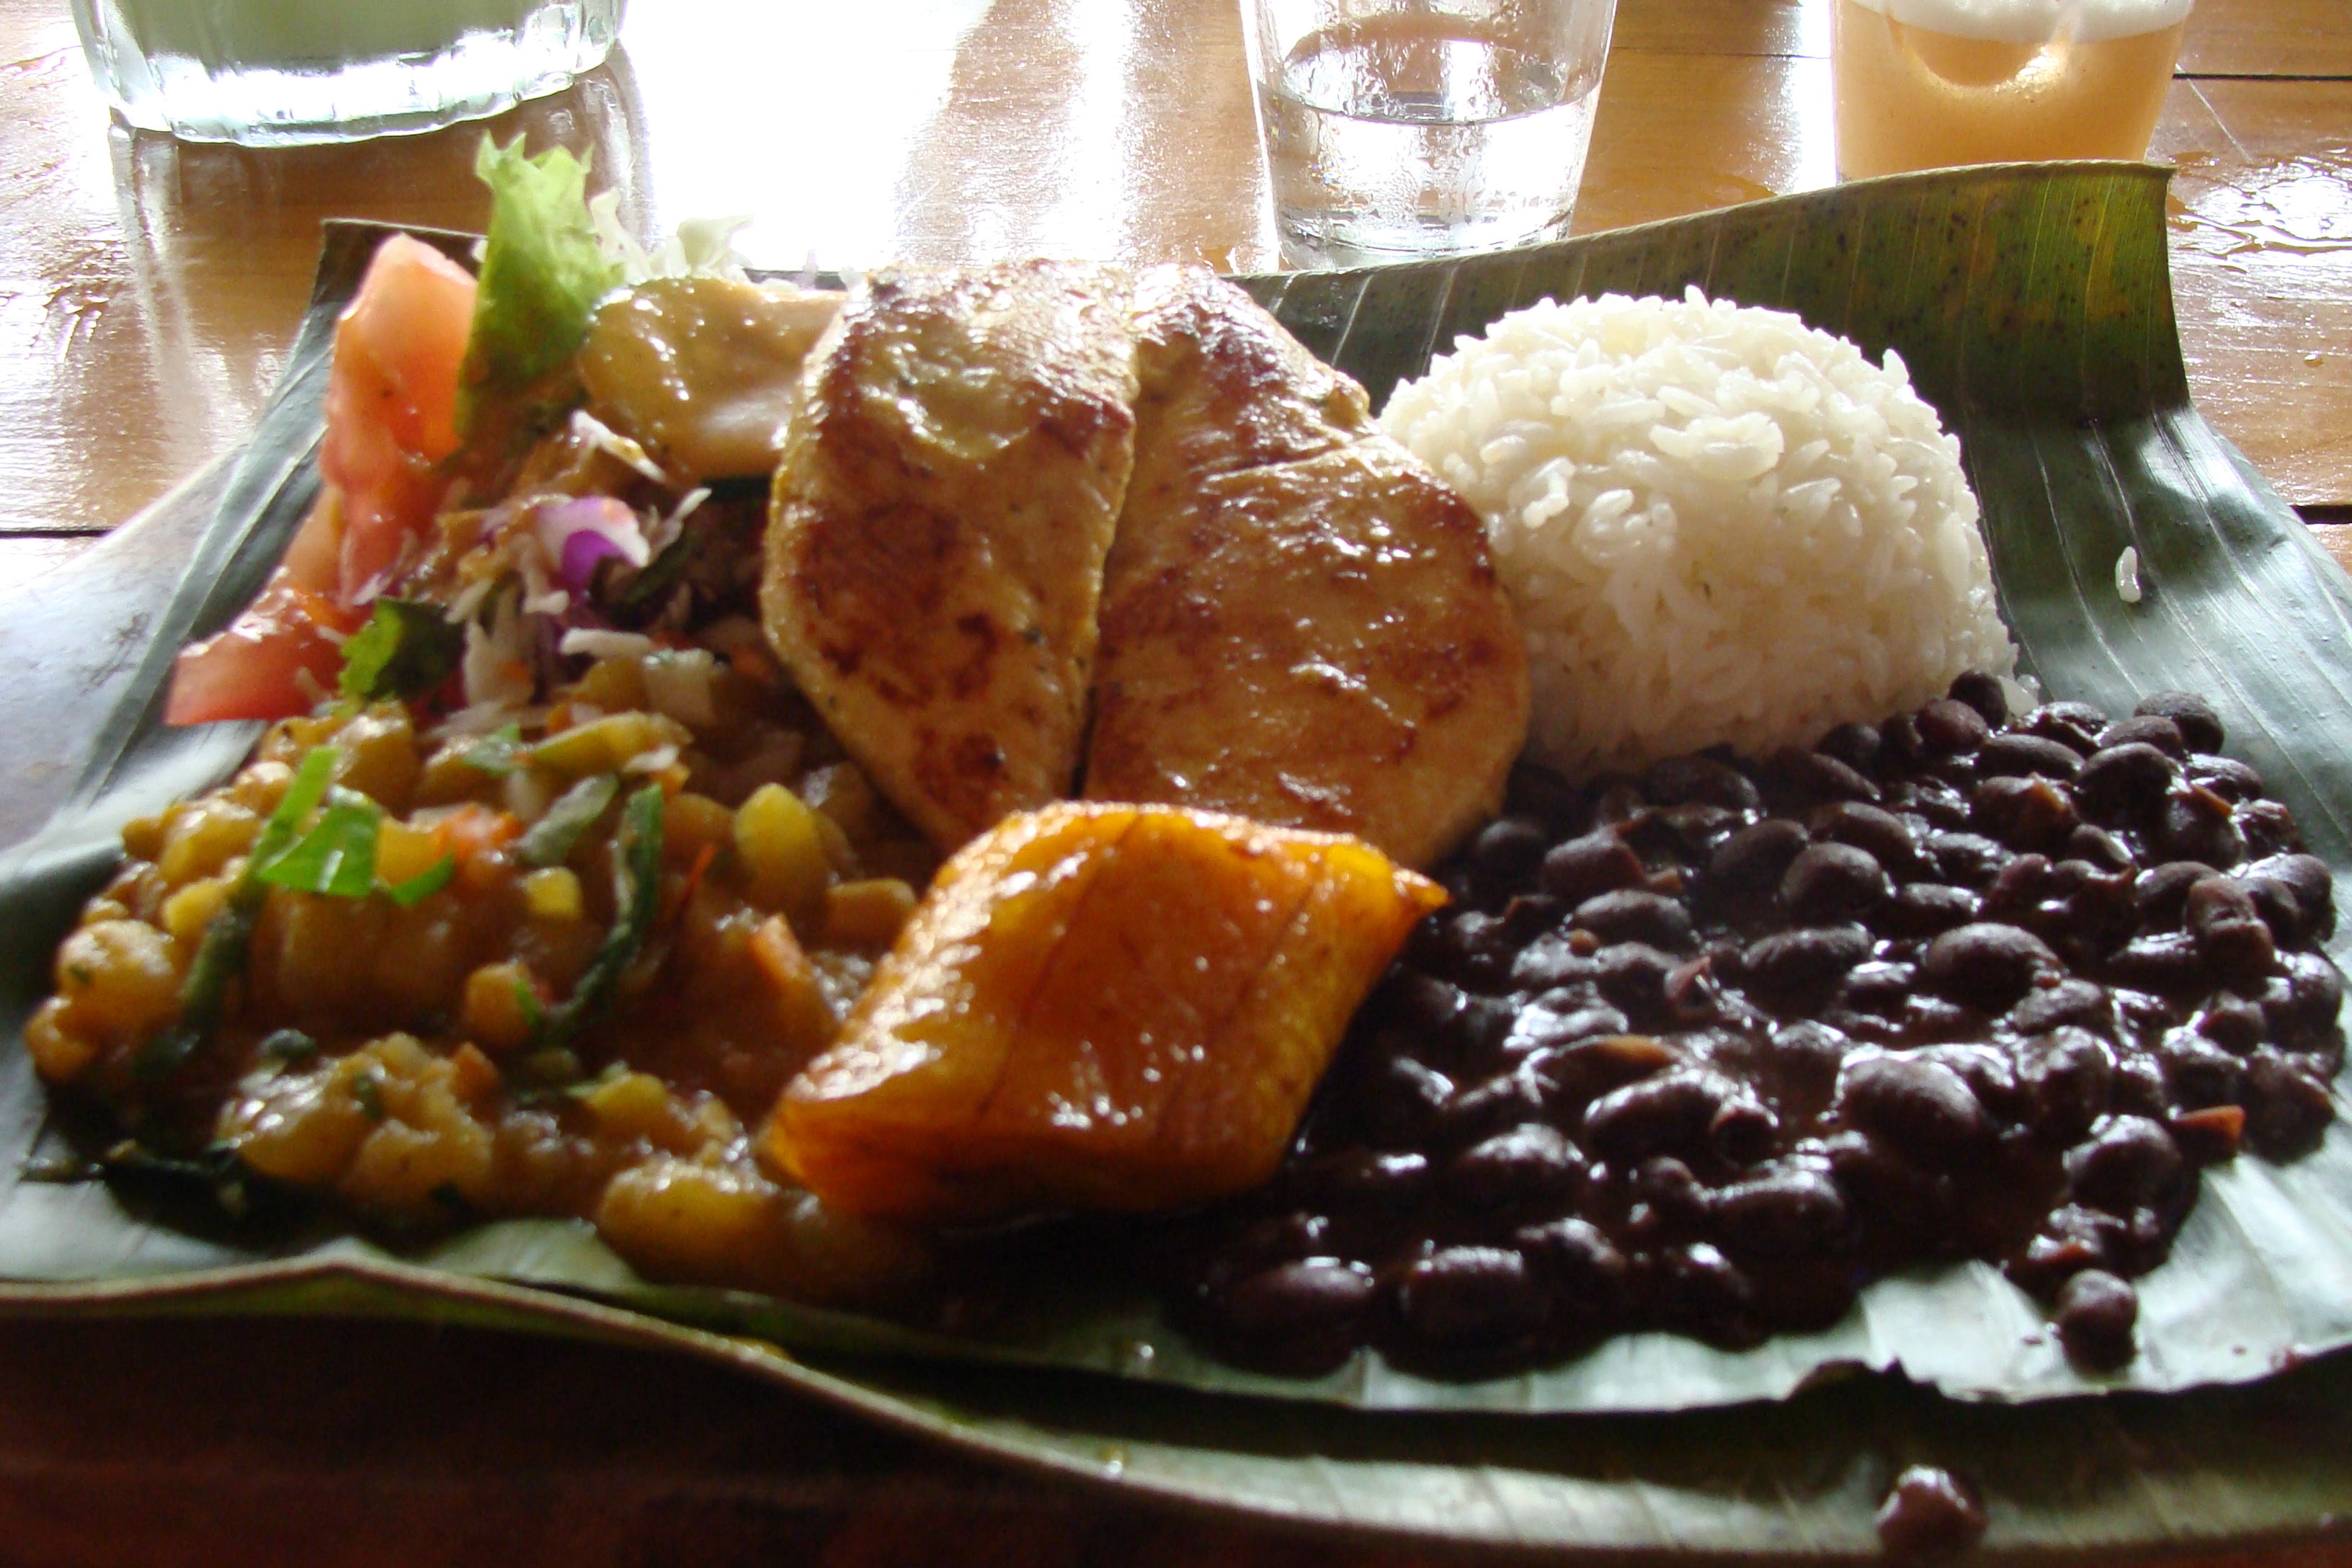 Costa Rican plate of food.